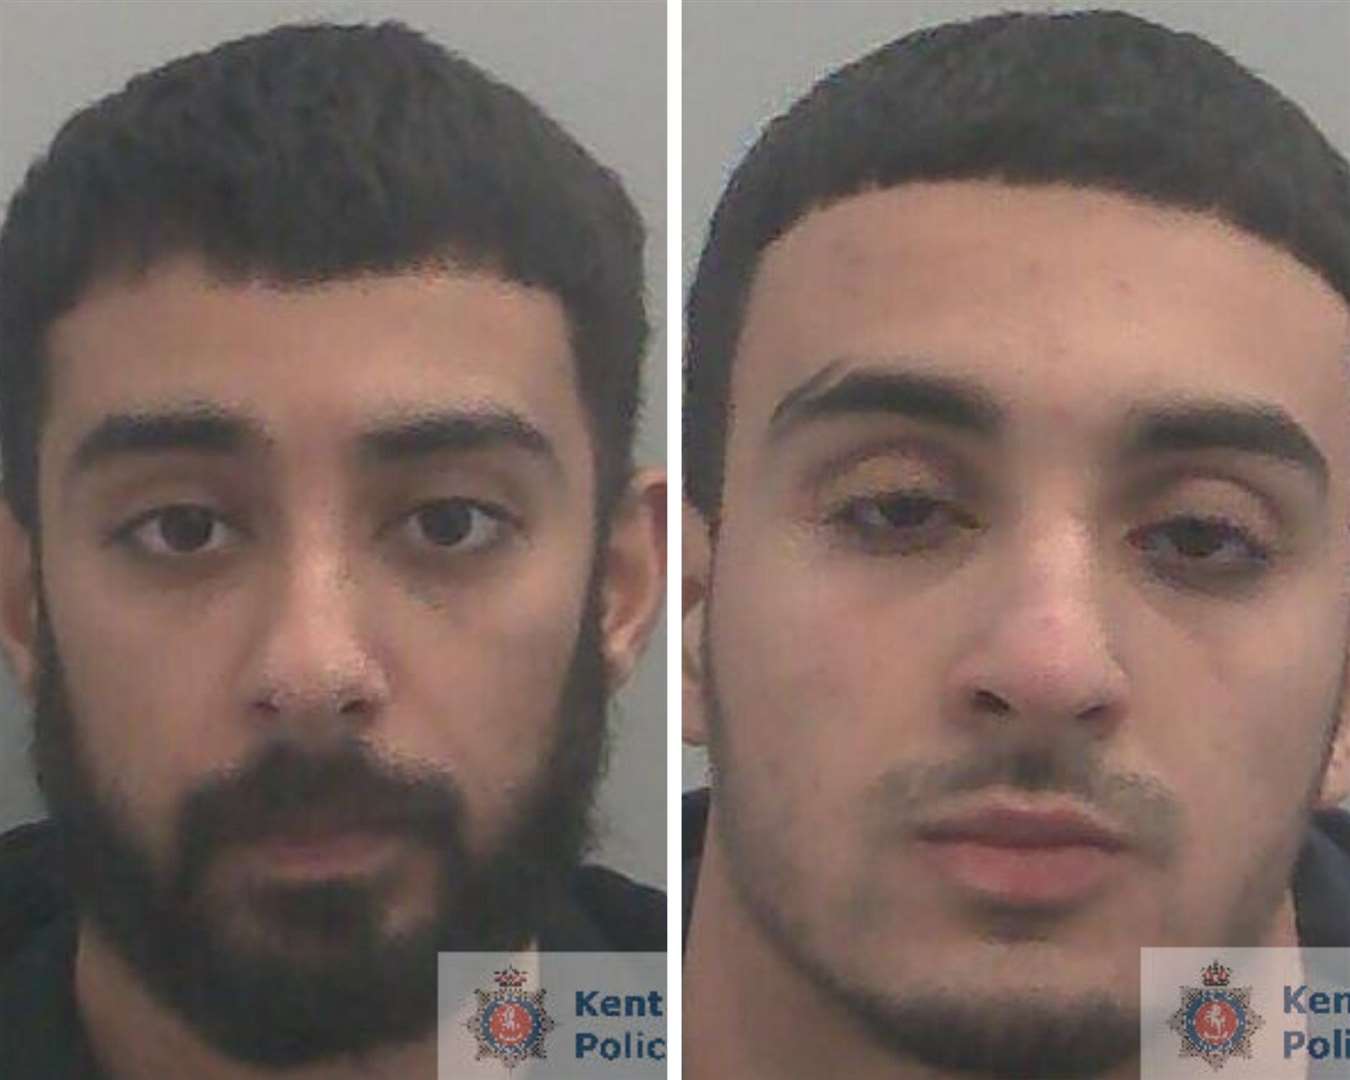 Imaan Farjani, left, and his brother Younis Farjani have been jailed. Picture: Kent Police